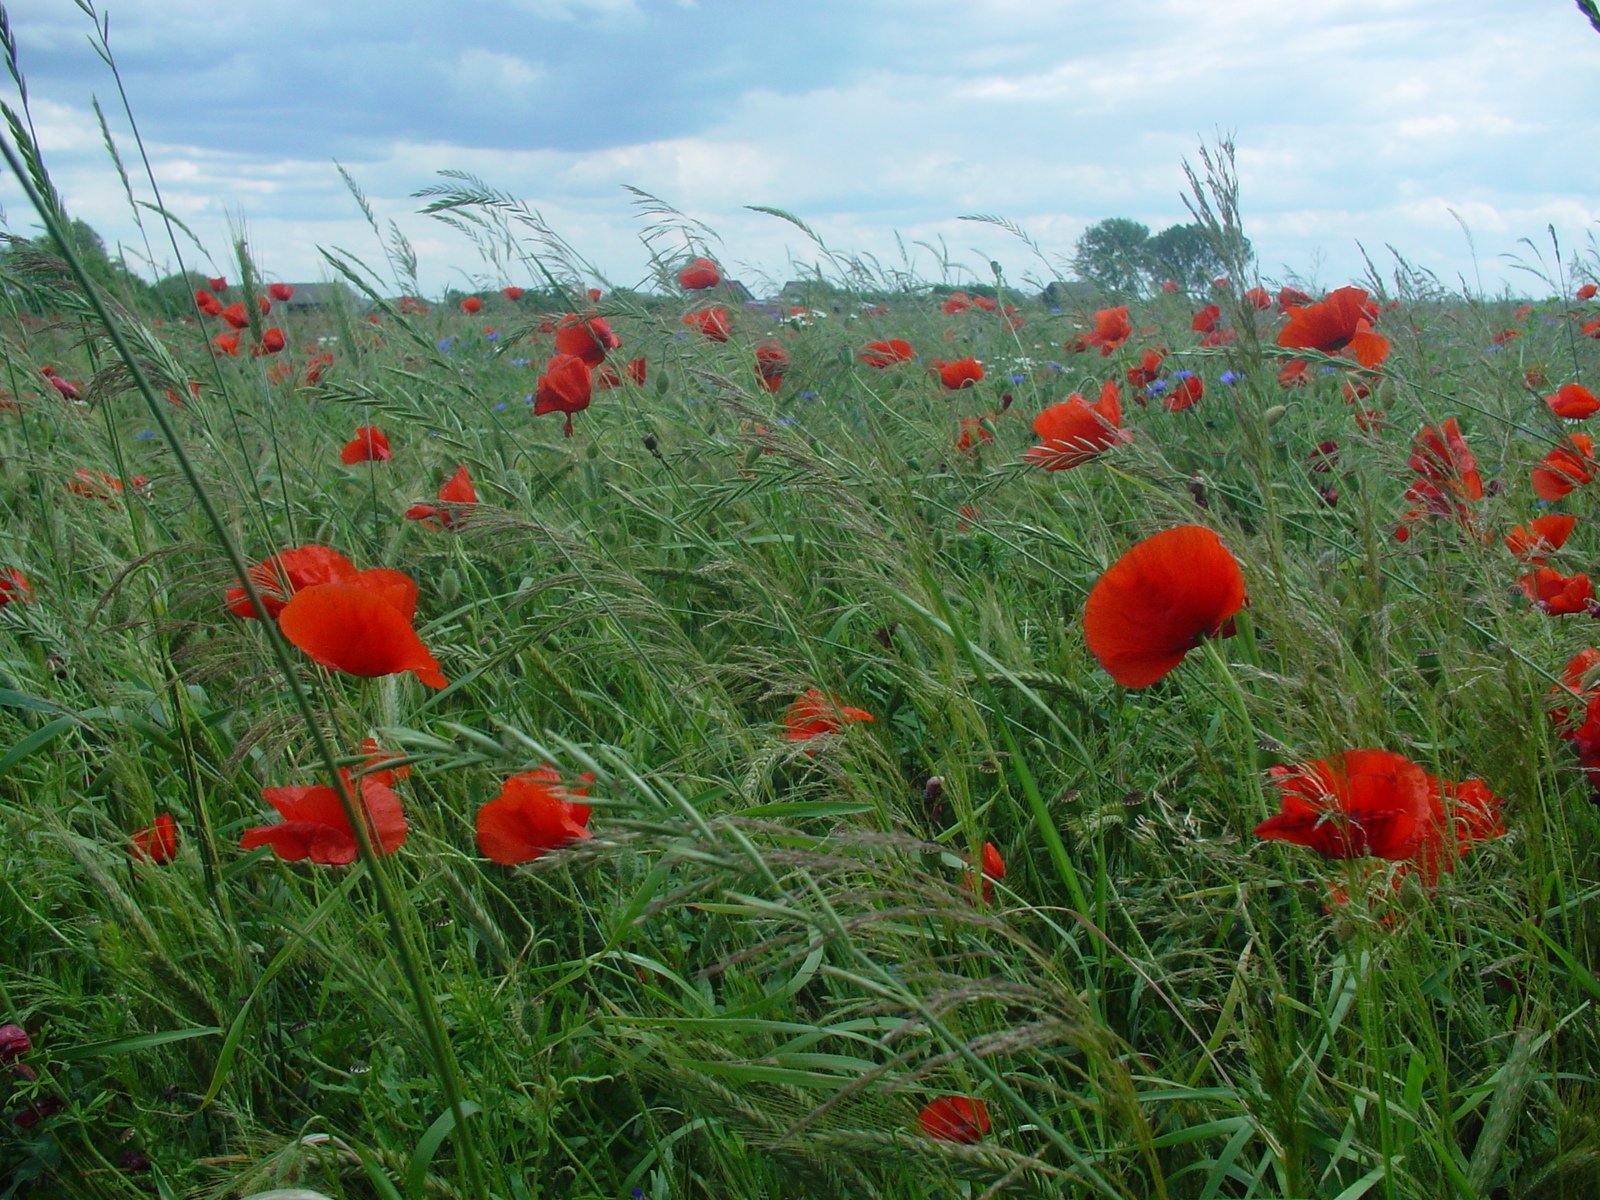 a field full of red flowers in the grass